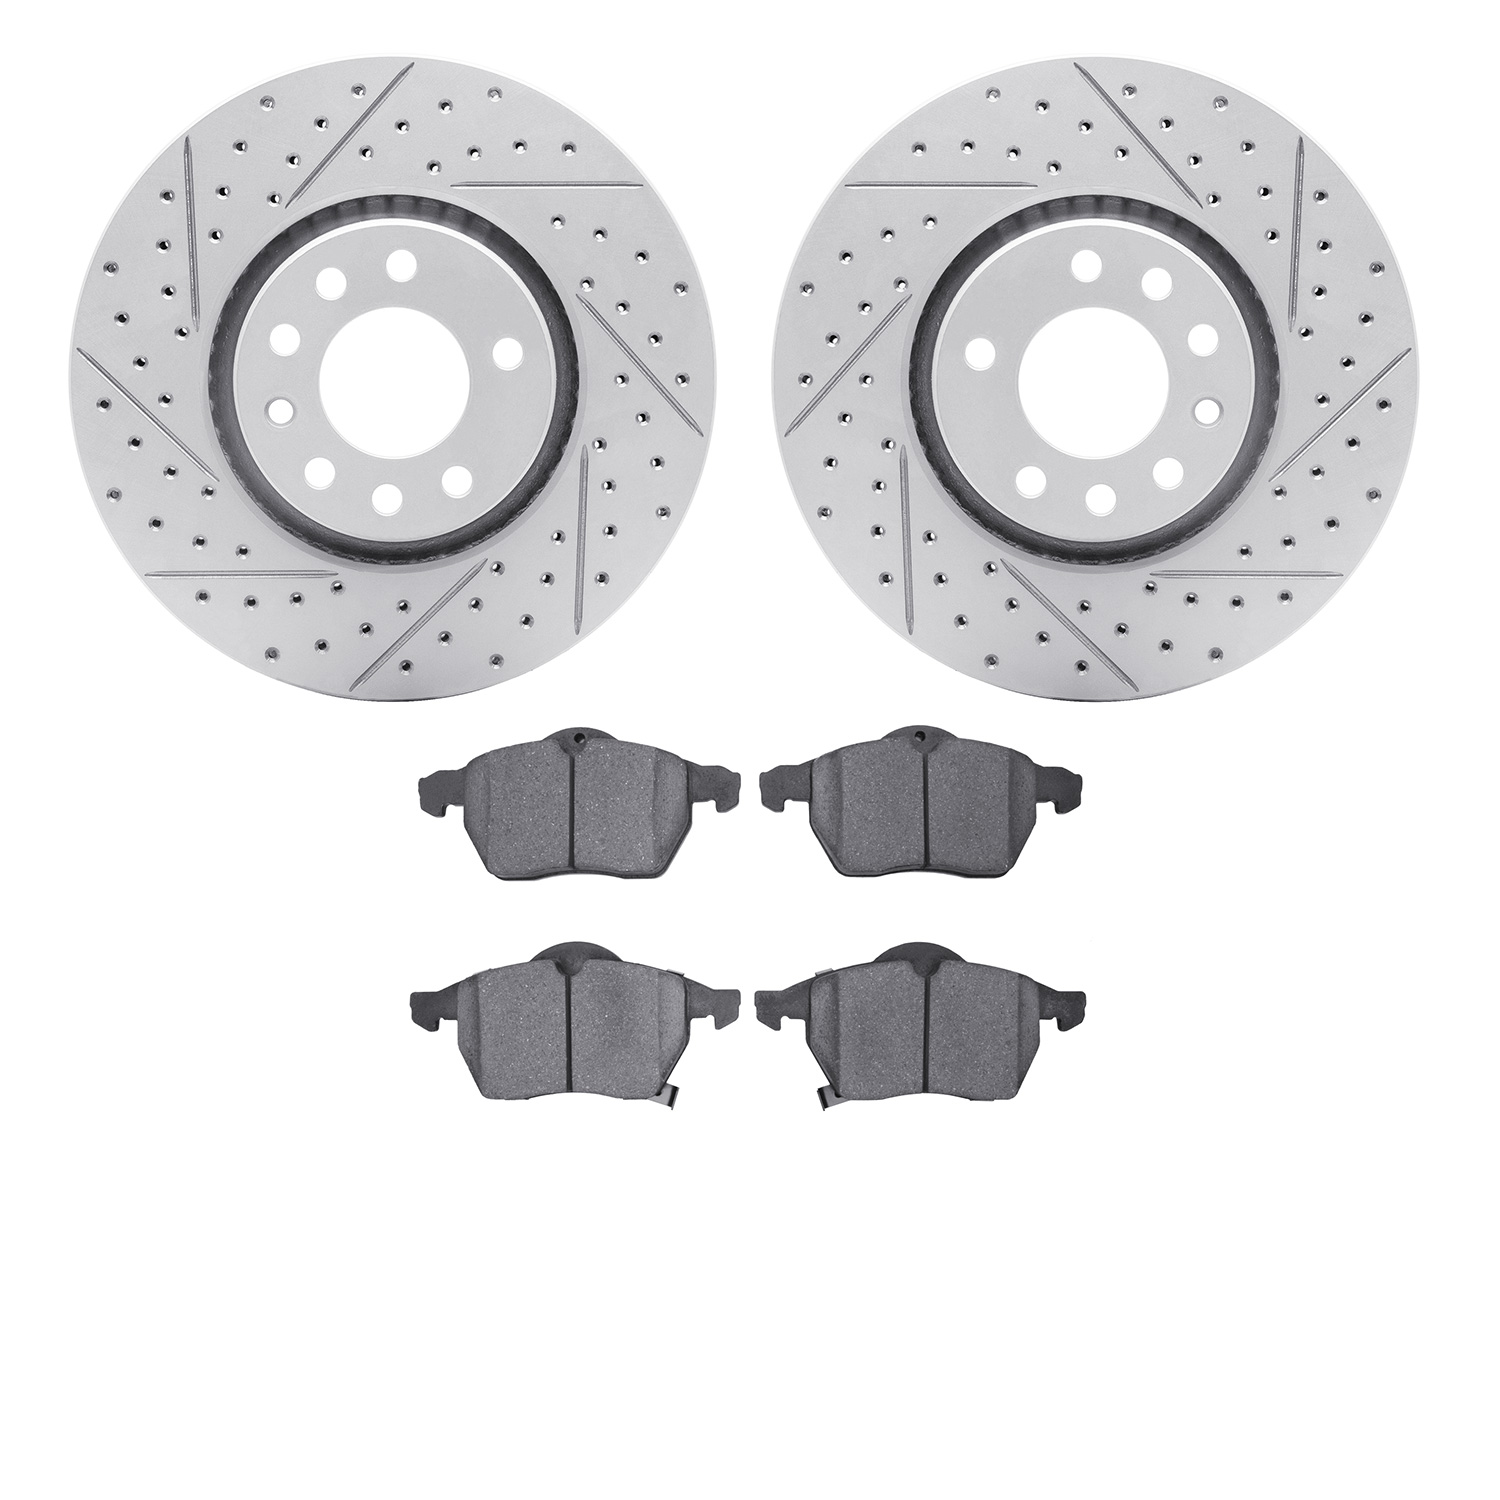 2602-65009 Geoperformance Drilled/Slotted Rotors w/5000 Euro Ceramic Brake Pads Kit, 1999-2010 GM, Position: Front